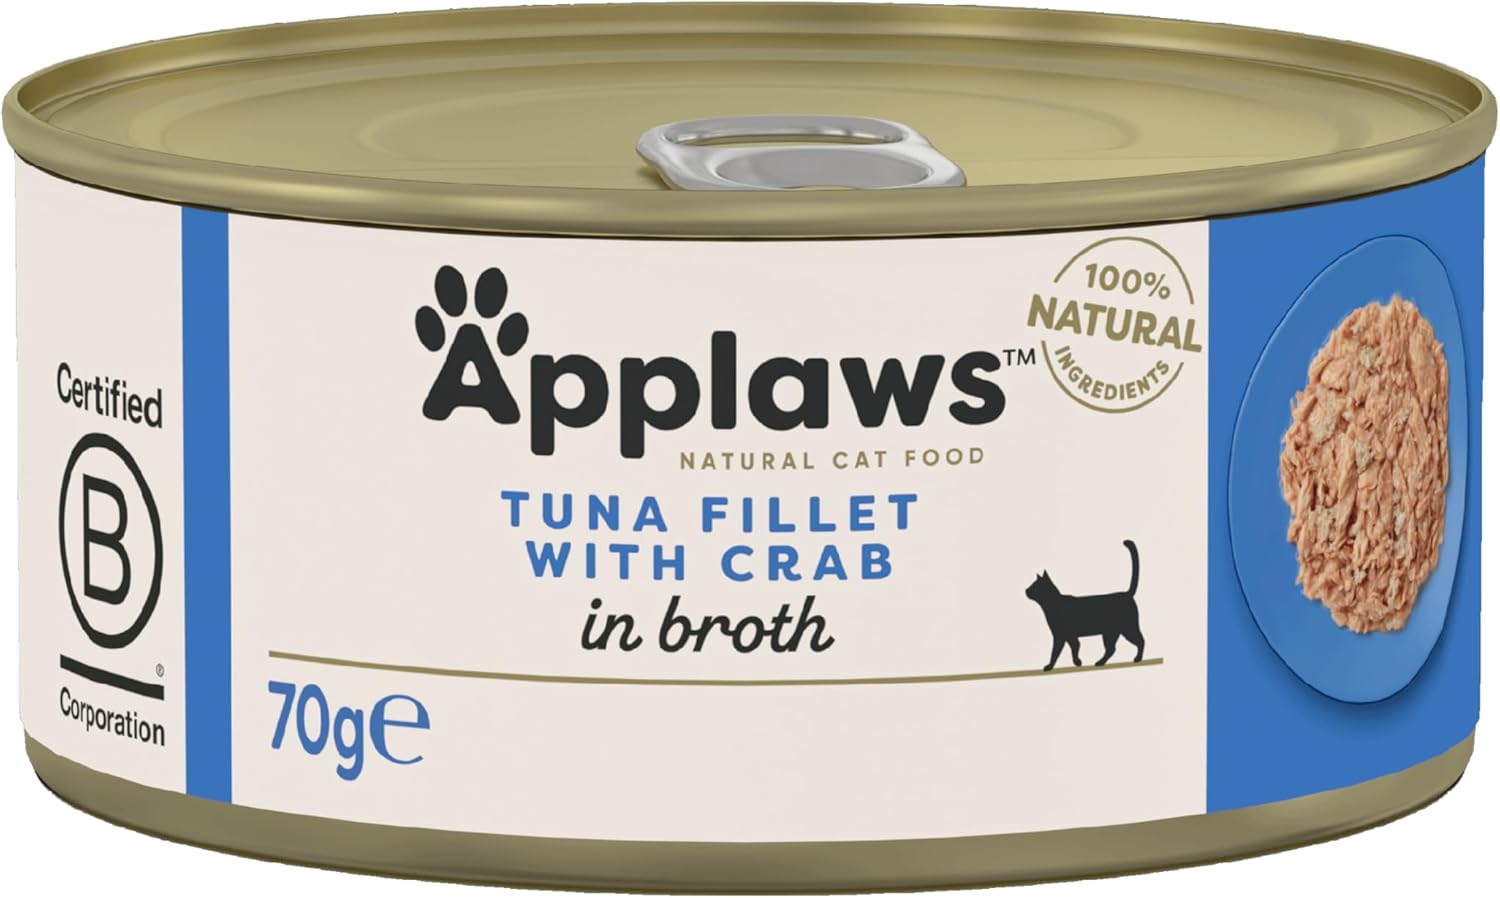 Applaws 100% Natural Wet Cat Food, Tuna with Crab, 70g (Pack of 24)?9104753